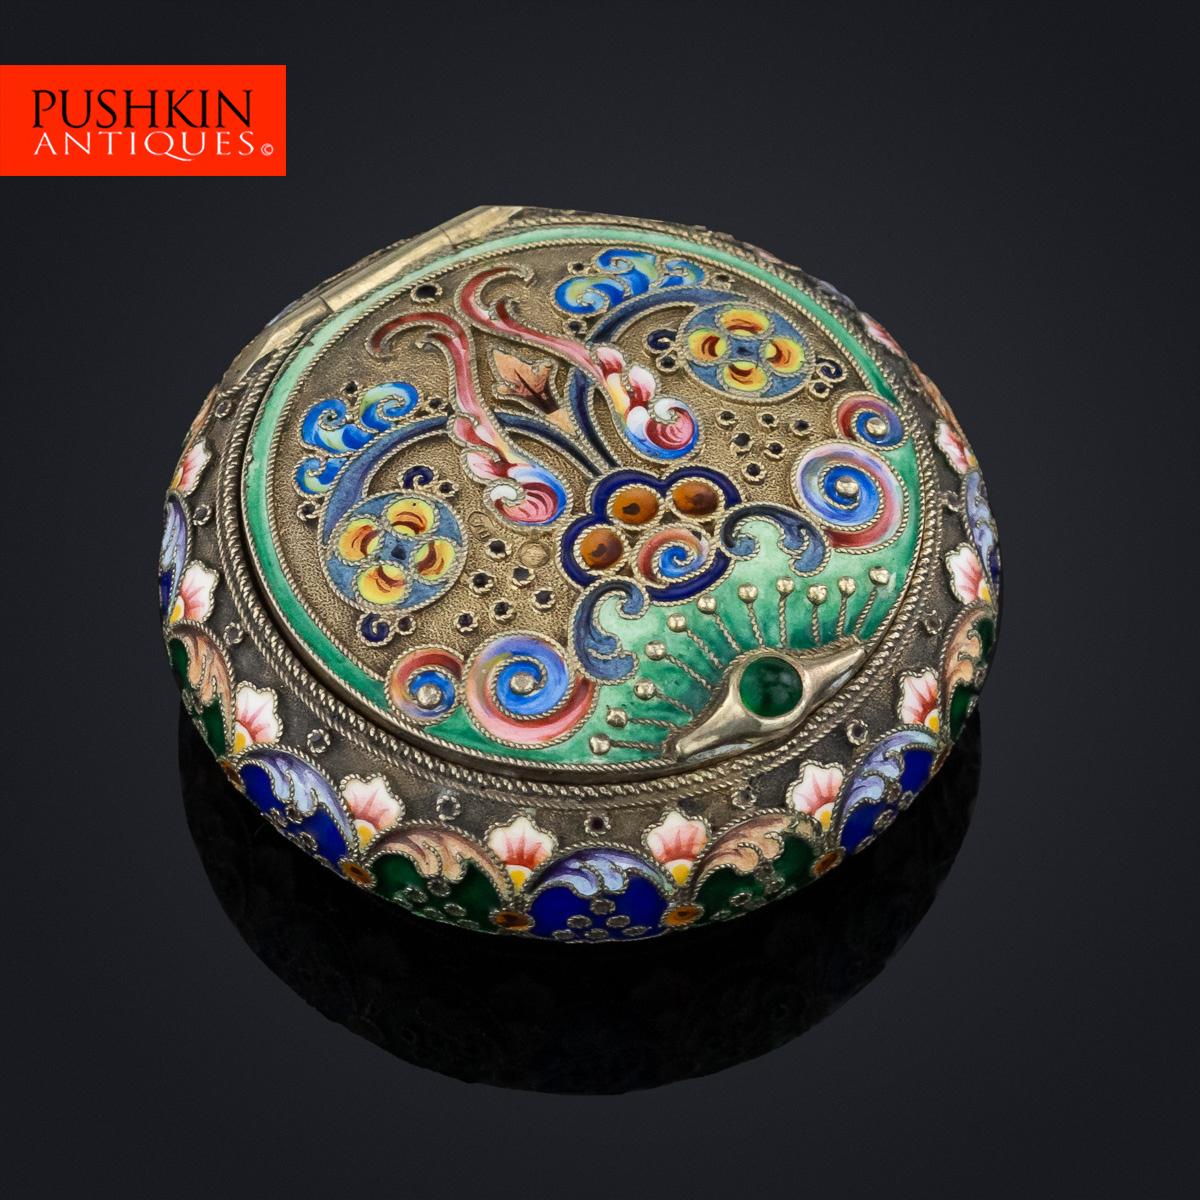 Antique early 20th century Imperial Russian solid silver and hand painted enamel, cushion shaped pill box, all side decorated with traditional Russian stylised flowers, foliage designs in polychrome cloisonne' enamel, the lid set with a gold and